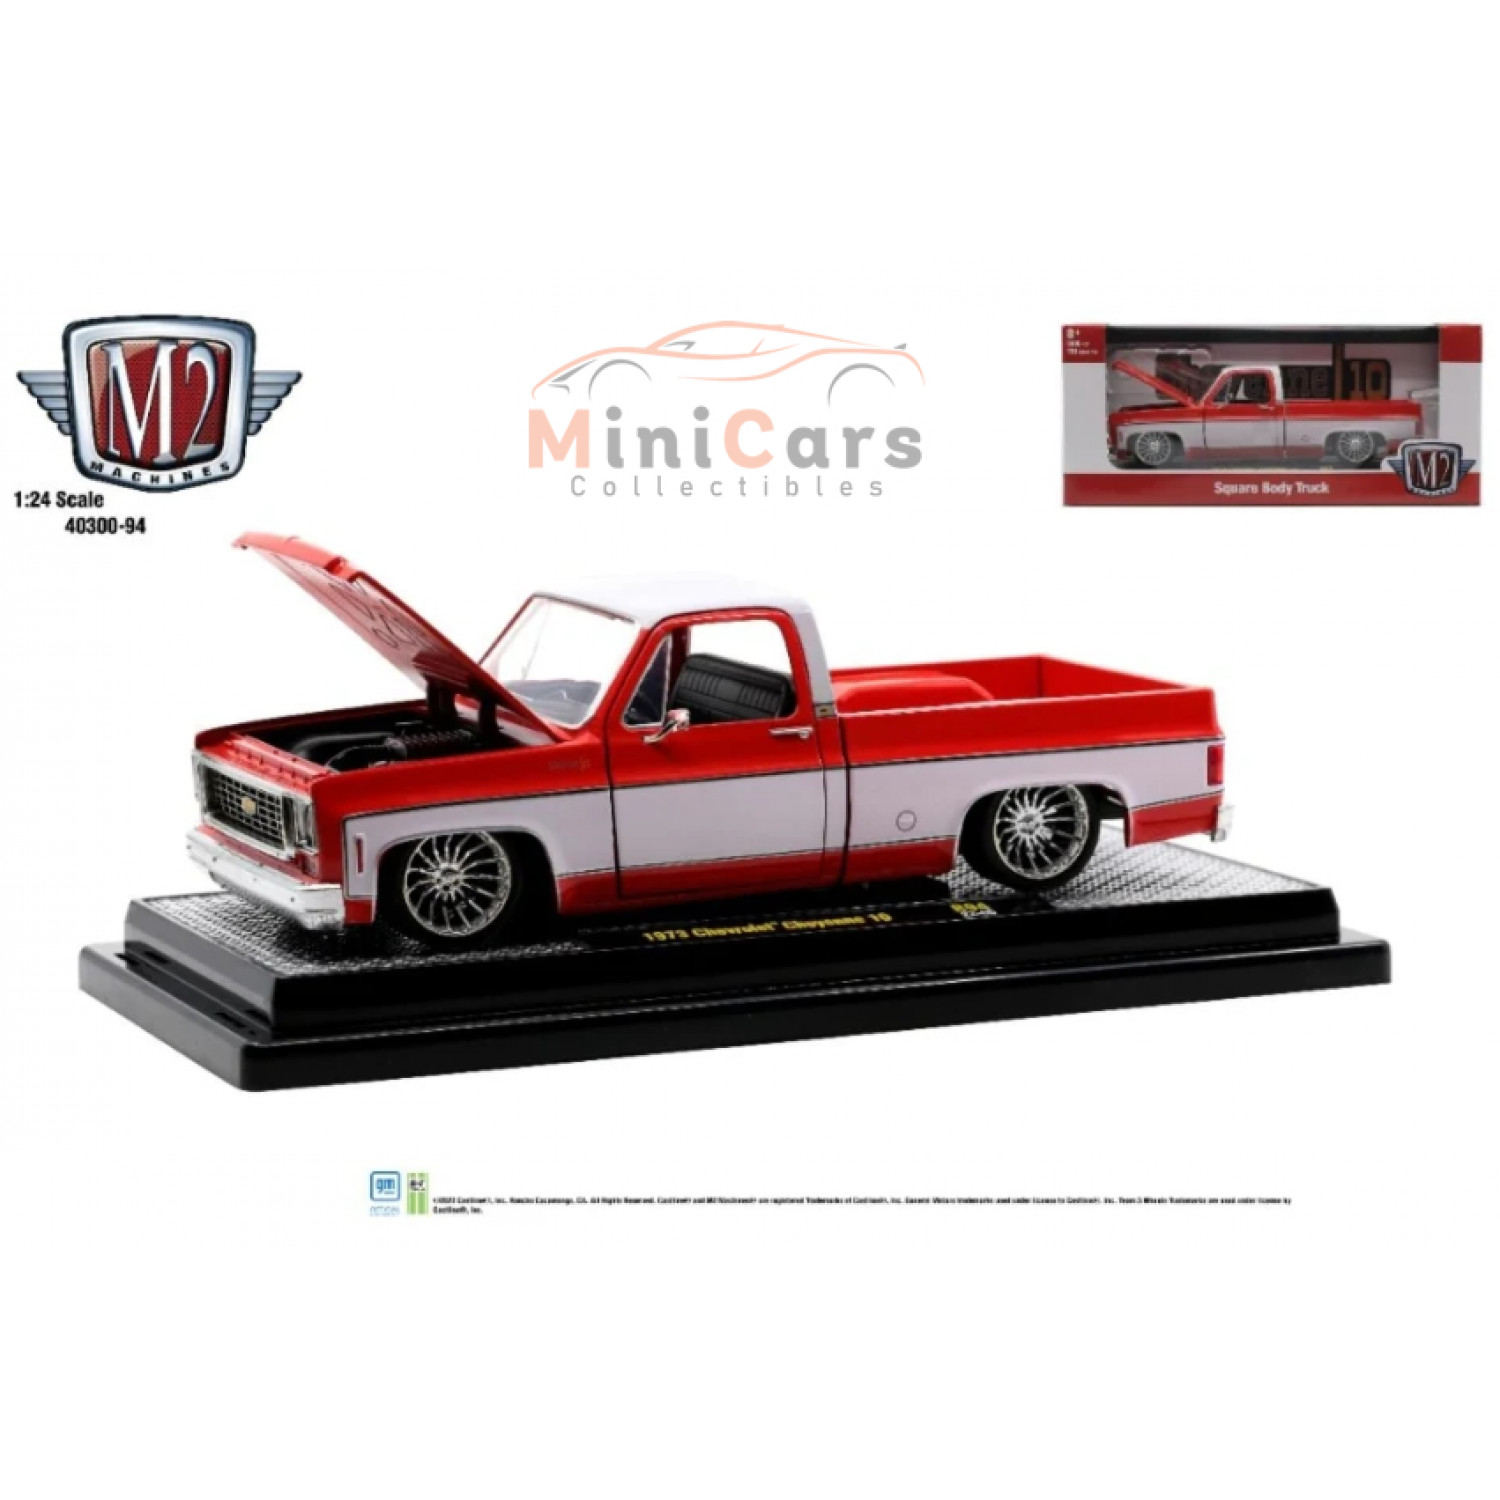 1973 Chevrolet Cheyenne 10 Square Body Truck Flame Red With Bright White 1:24